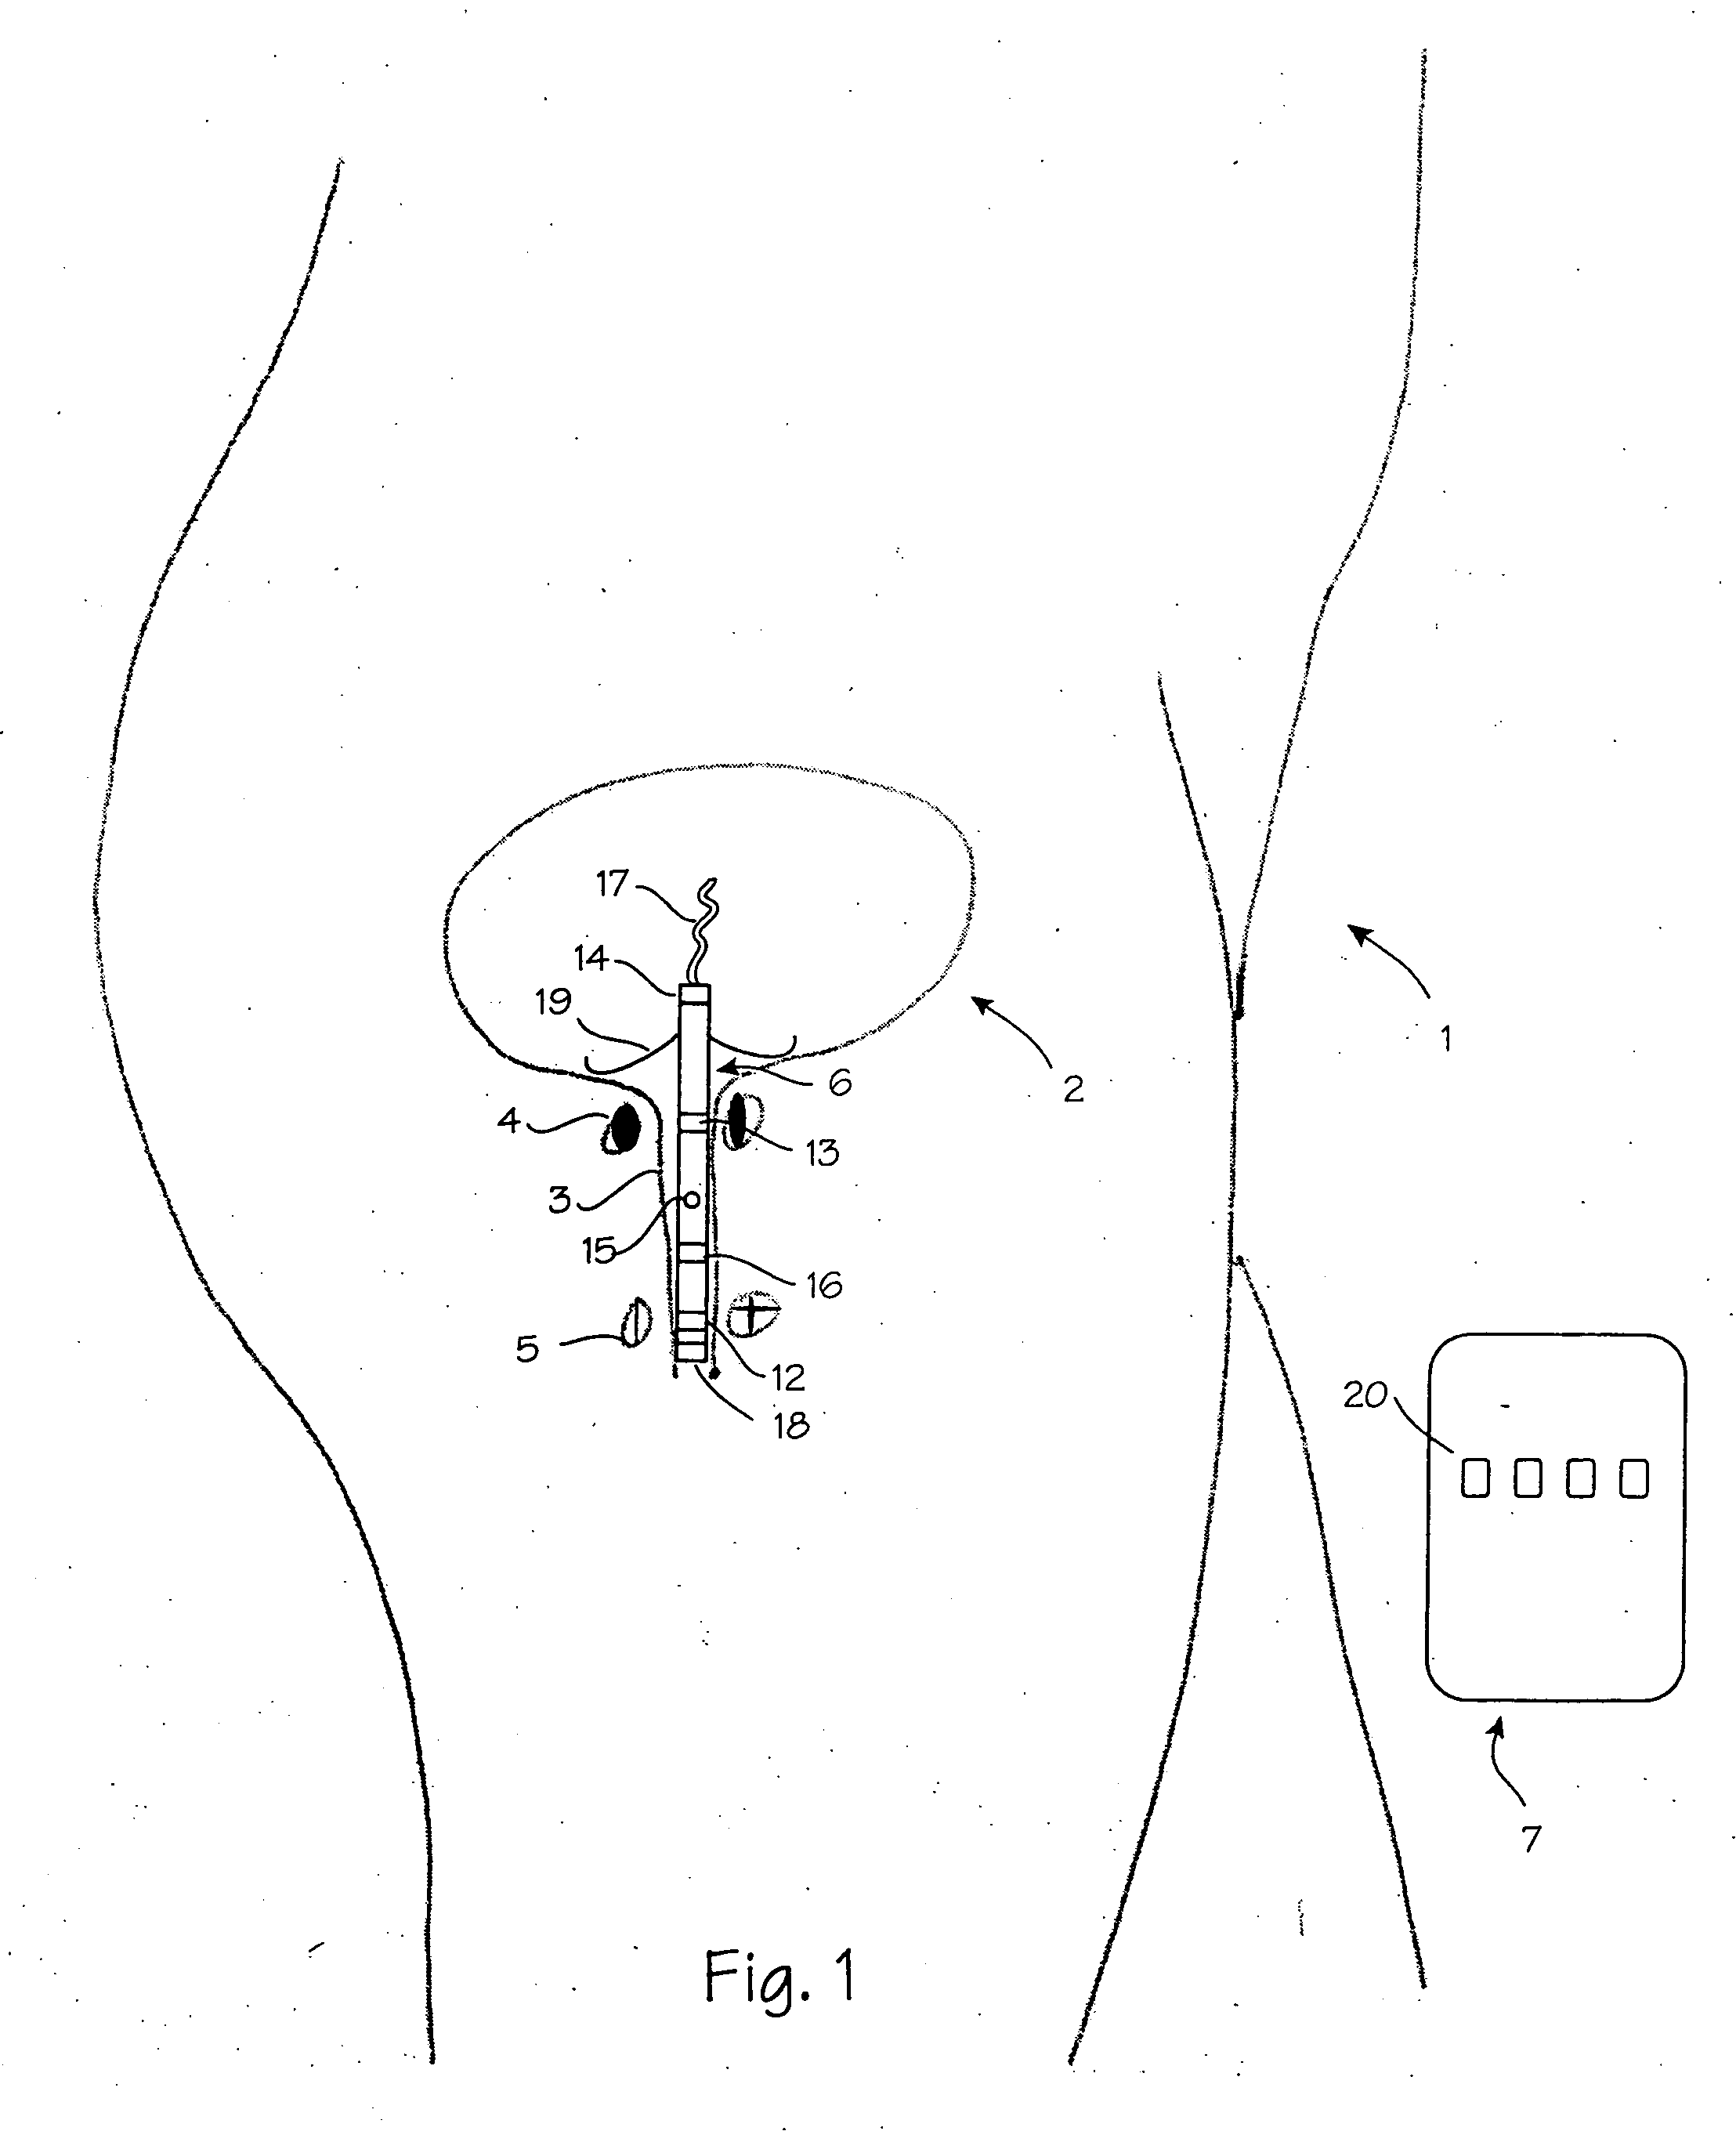 Wireless urinary incontinence monitoring system